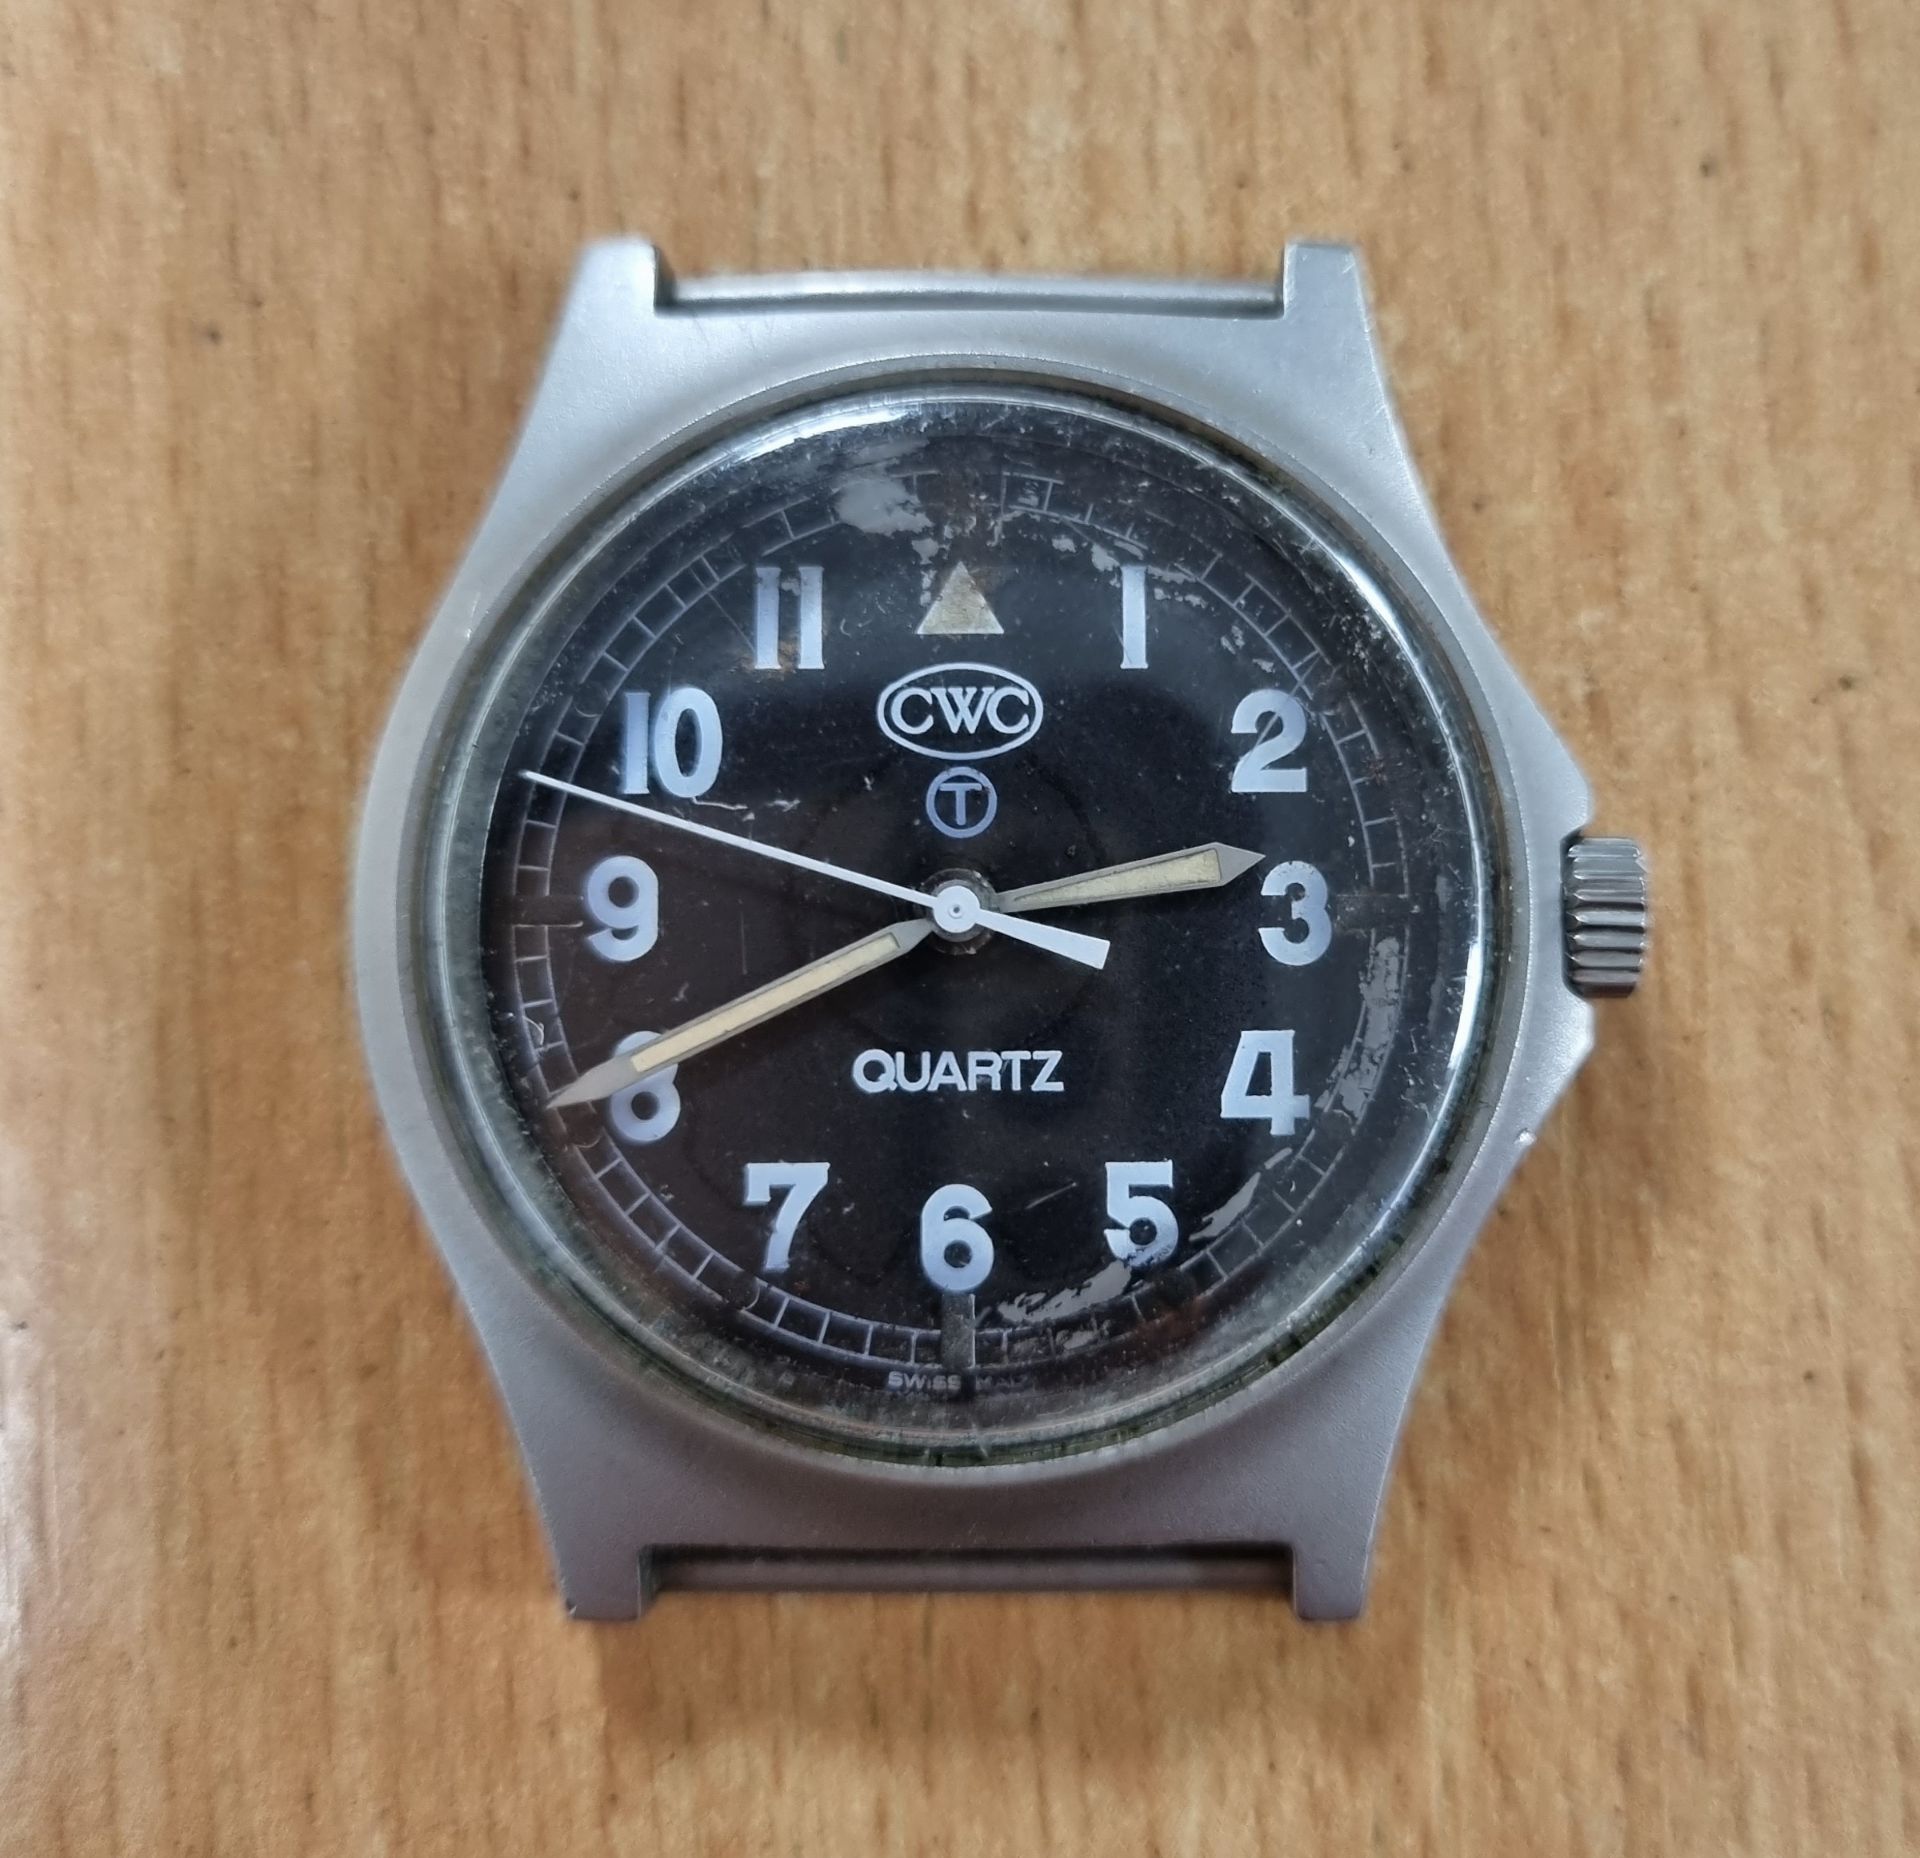 CWC G10 military watch 1990 - 0552 - NSN 6645-99-541-5317 - serial 68636 - 90